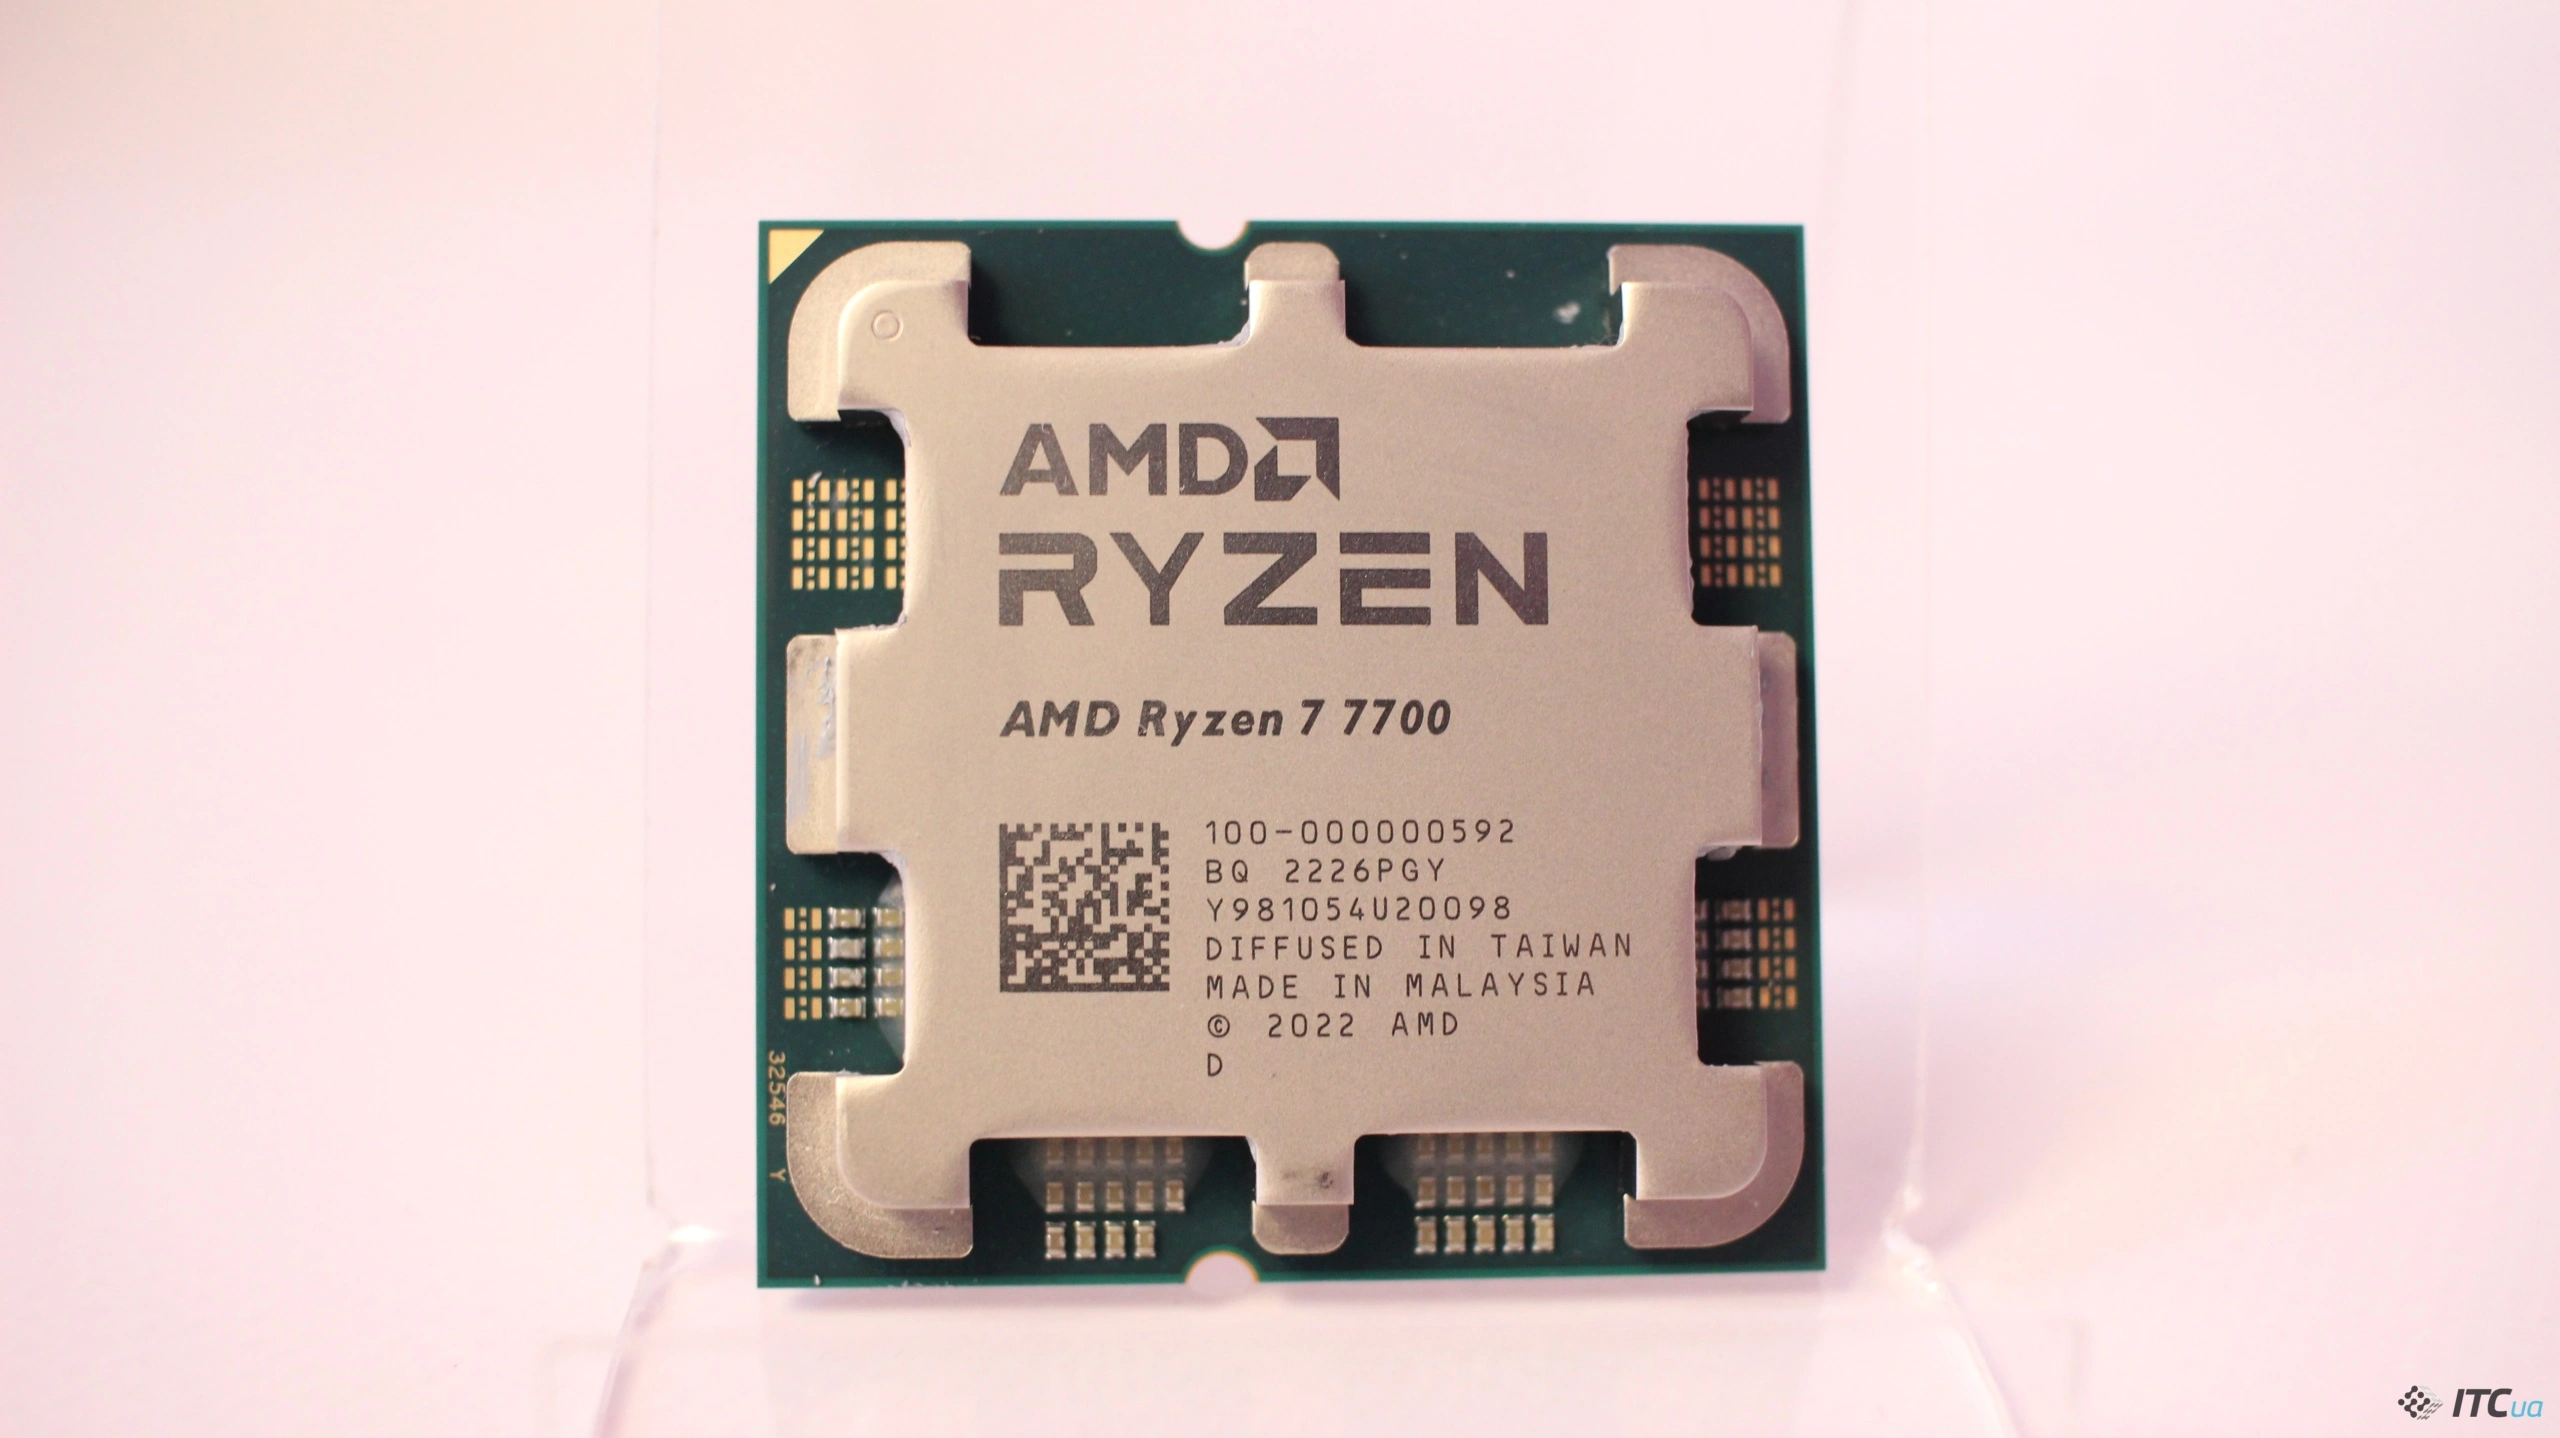 Ryzen-7-7700-is-the-best-processor-for-mixed-proction-workload-and-gaming-performance